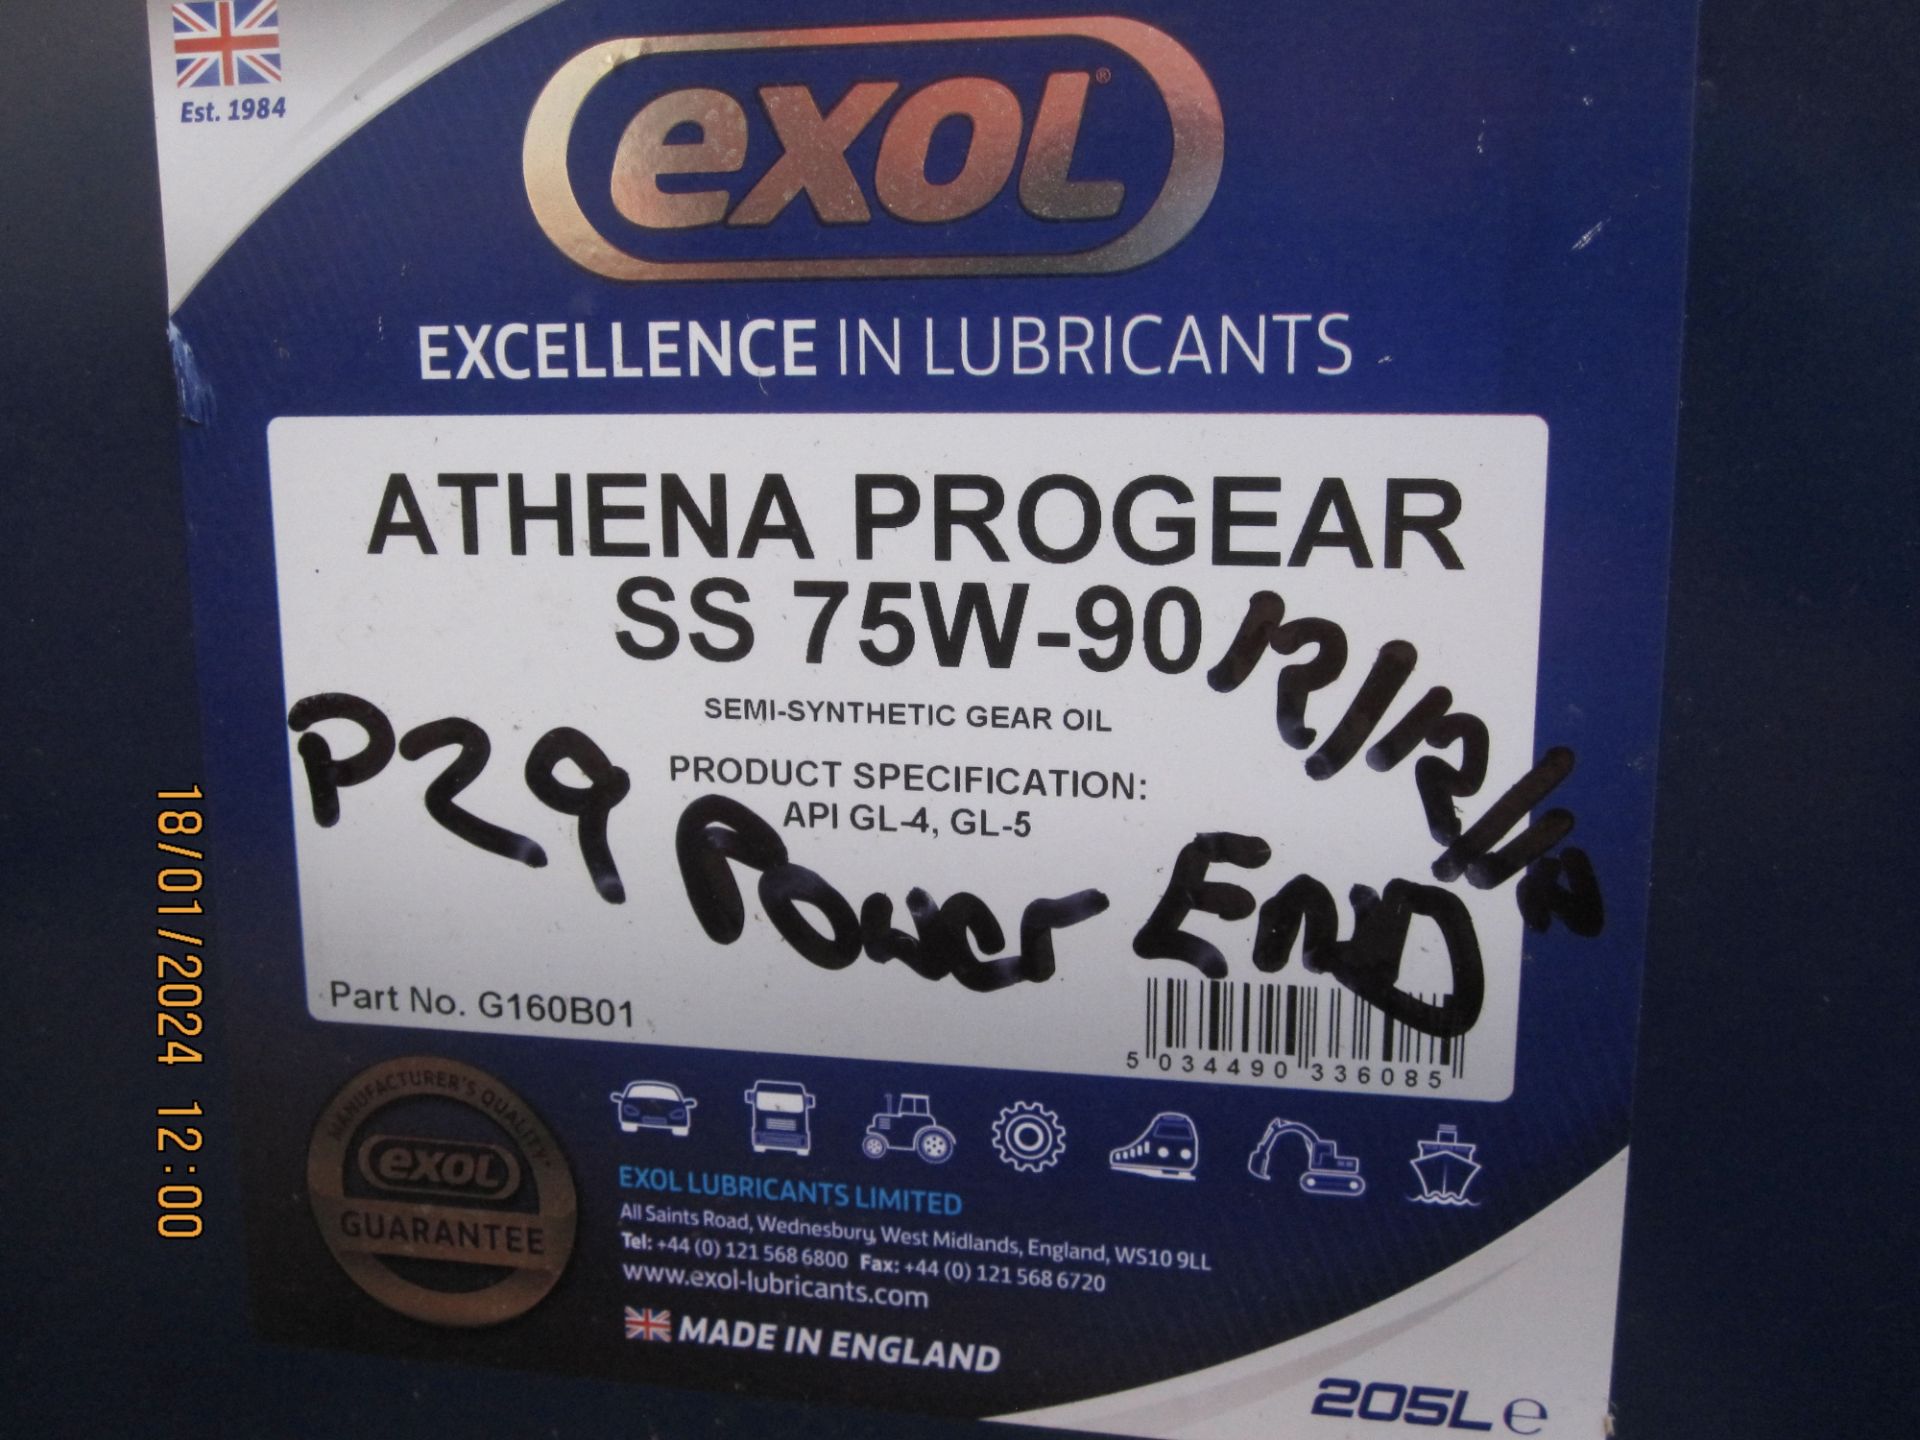 205litre drum Exol Athena Progear SS 75W - 90 Semi Synthetic Gear Oil (drum I) (LOCATION: Nottingham - Image 2 of 3